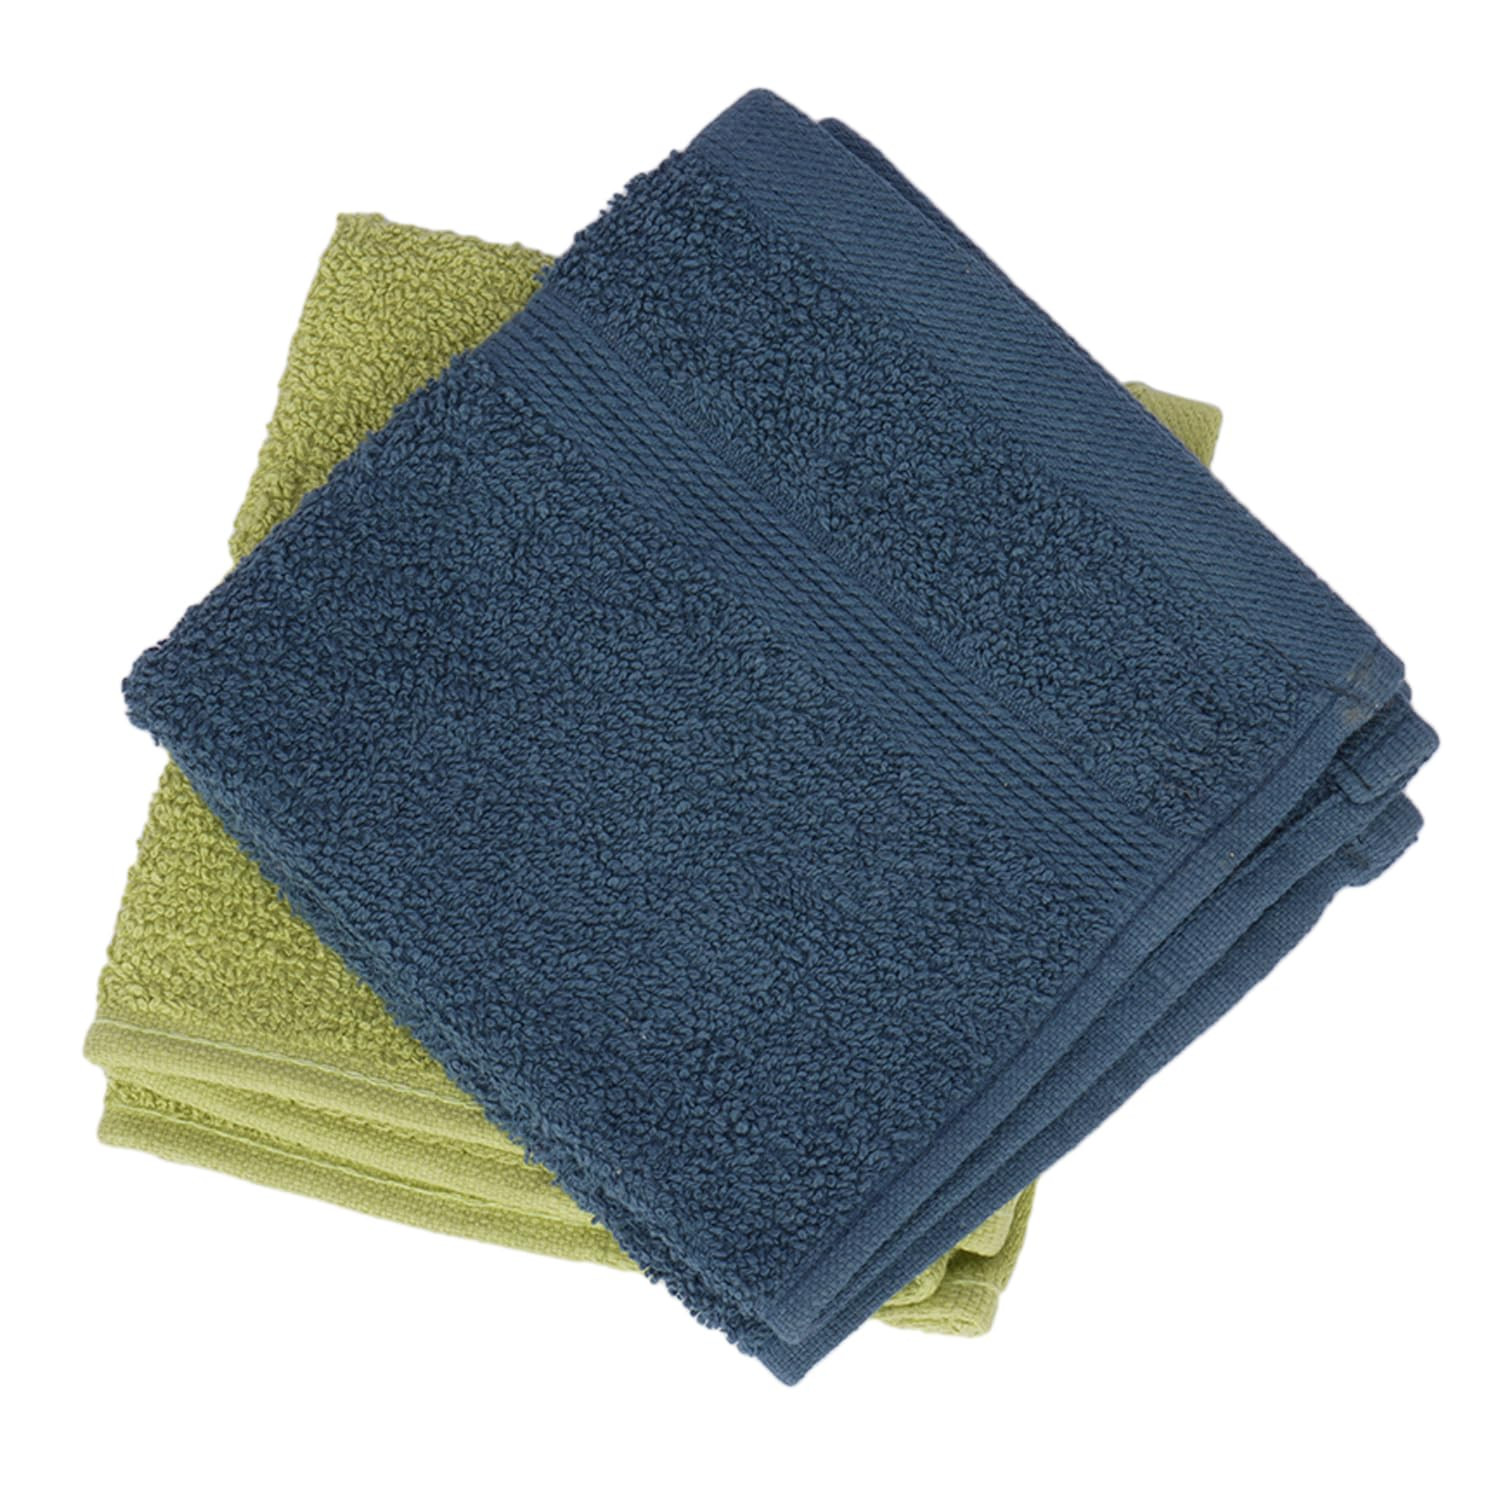 Kuber Industries 525 GSM Cotton Face towels |Super Soft, Quick Absorbent & Anti-Bacterial|Gym & Workout Towels|Pack of 2 (Blue & Green)